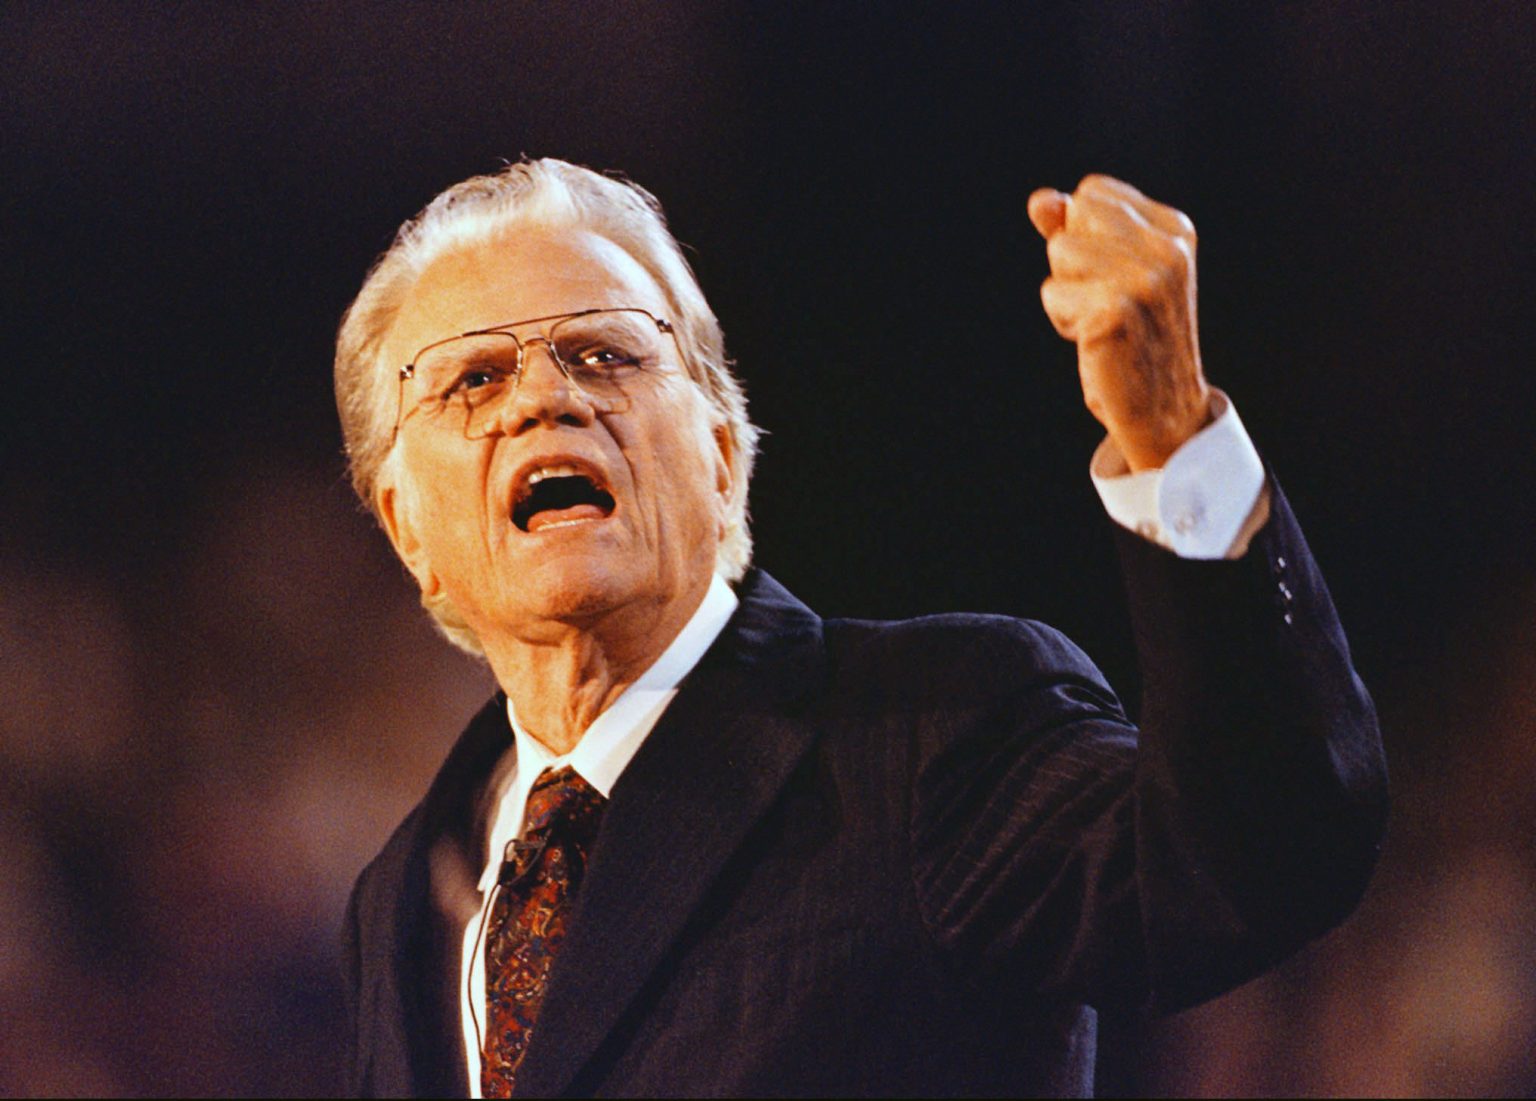 DOWNLOAD MP3: Whose Fool are You? by Evangelist BILLY GRAHAM (Sermon) 1